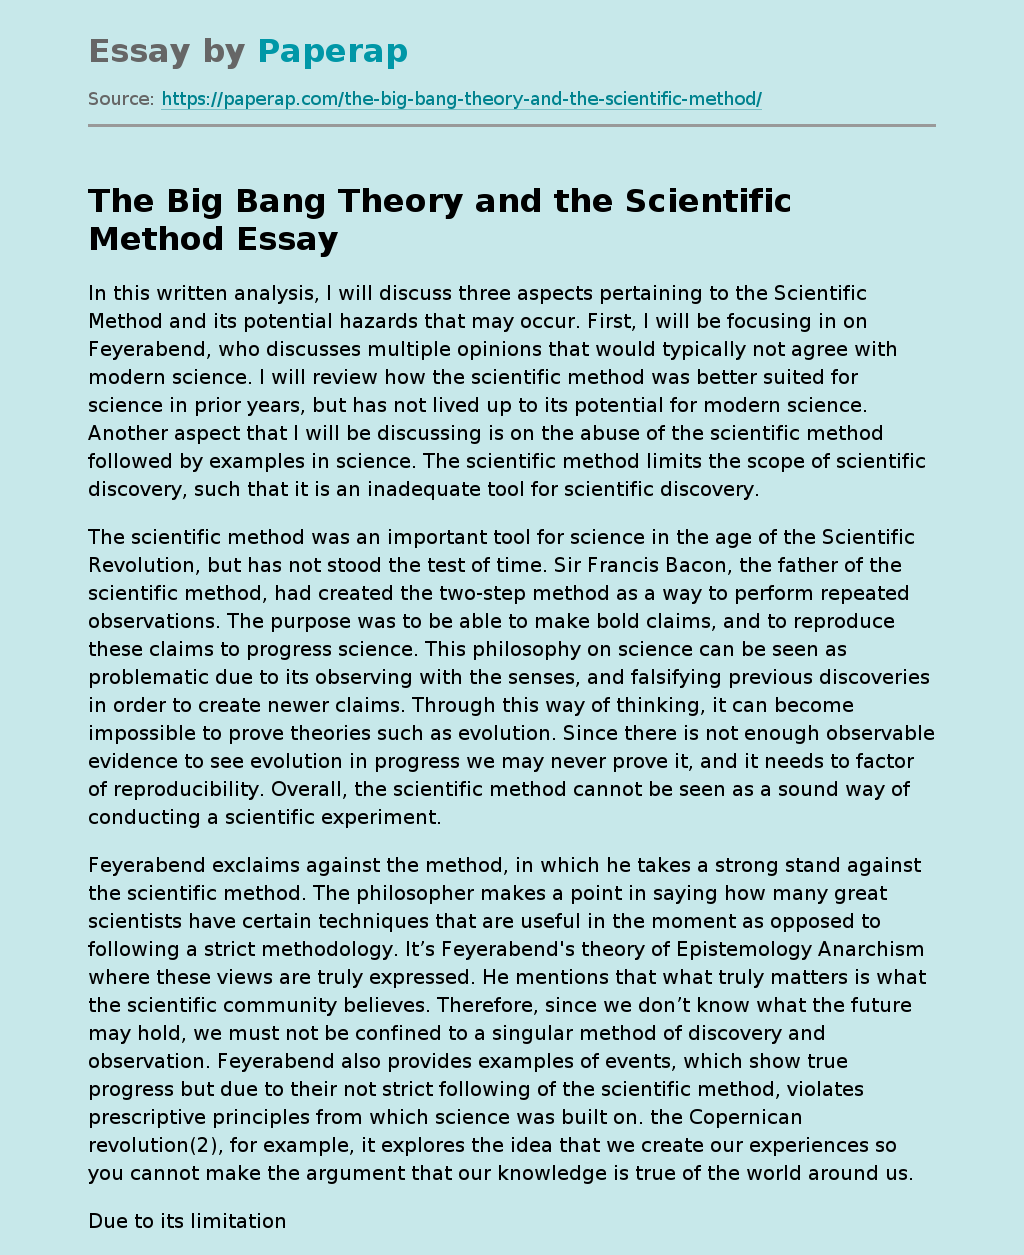 The Big Bang Theory and the Scientific Method